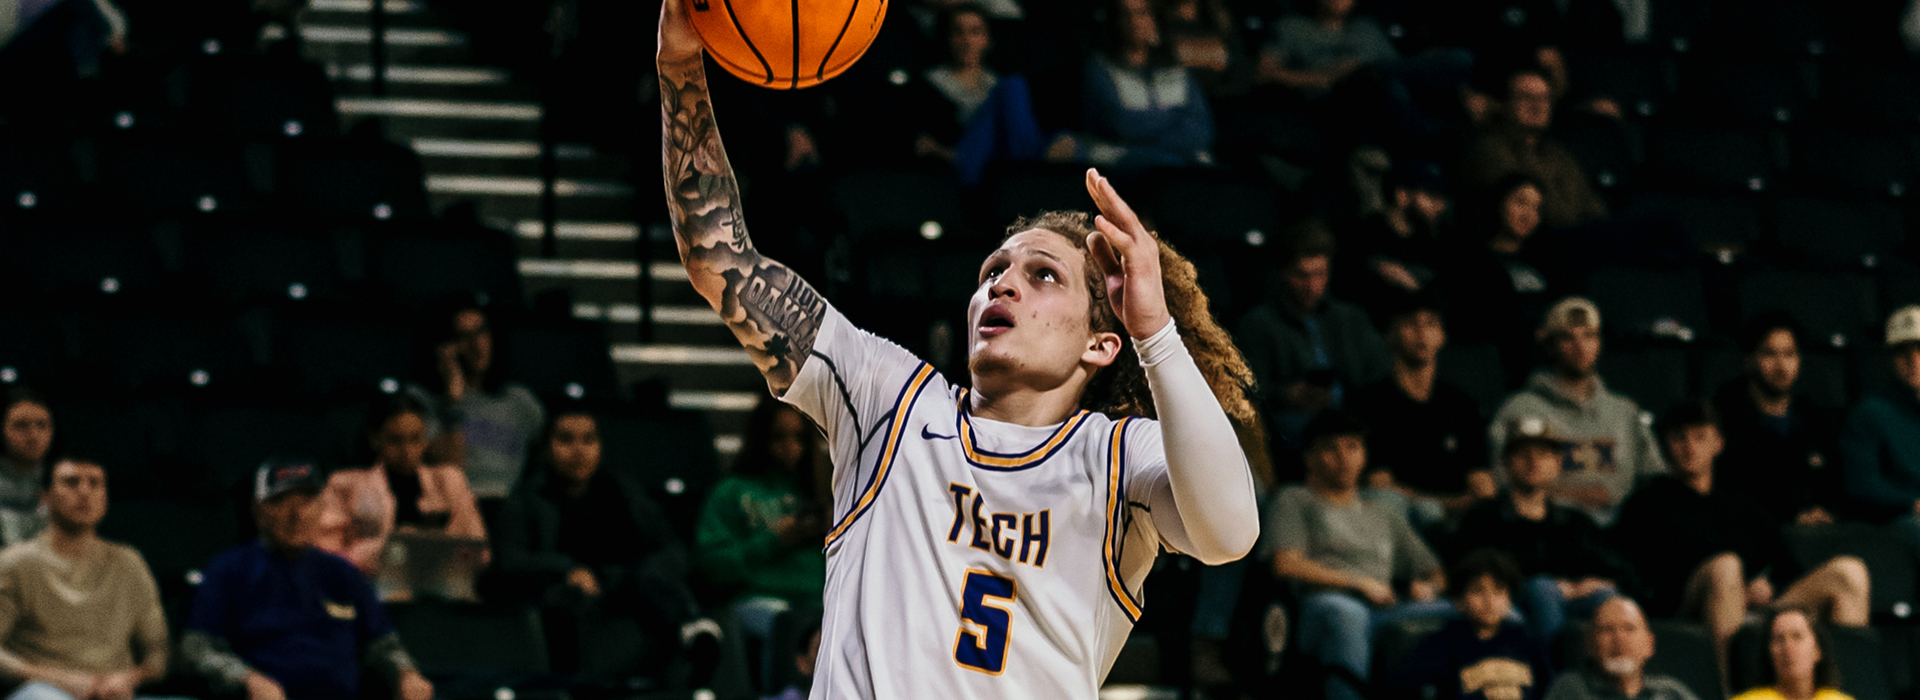 Thompson named OVC Newcomer of the Week following massive scoring surge